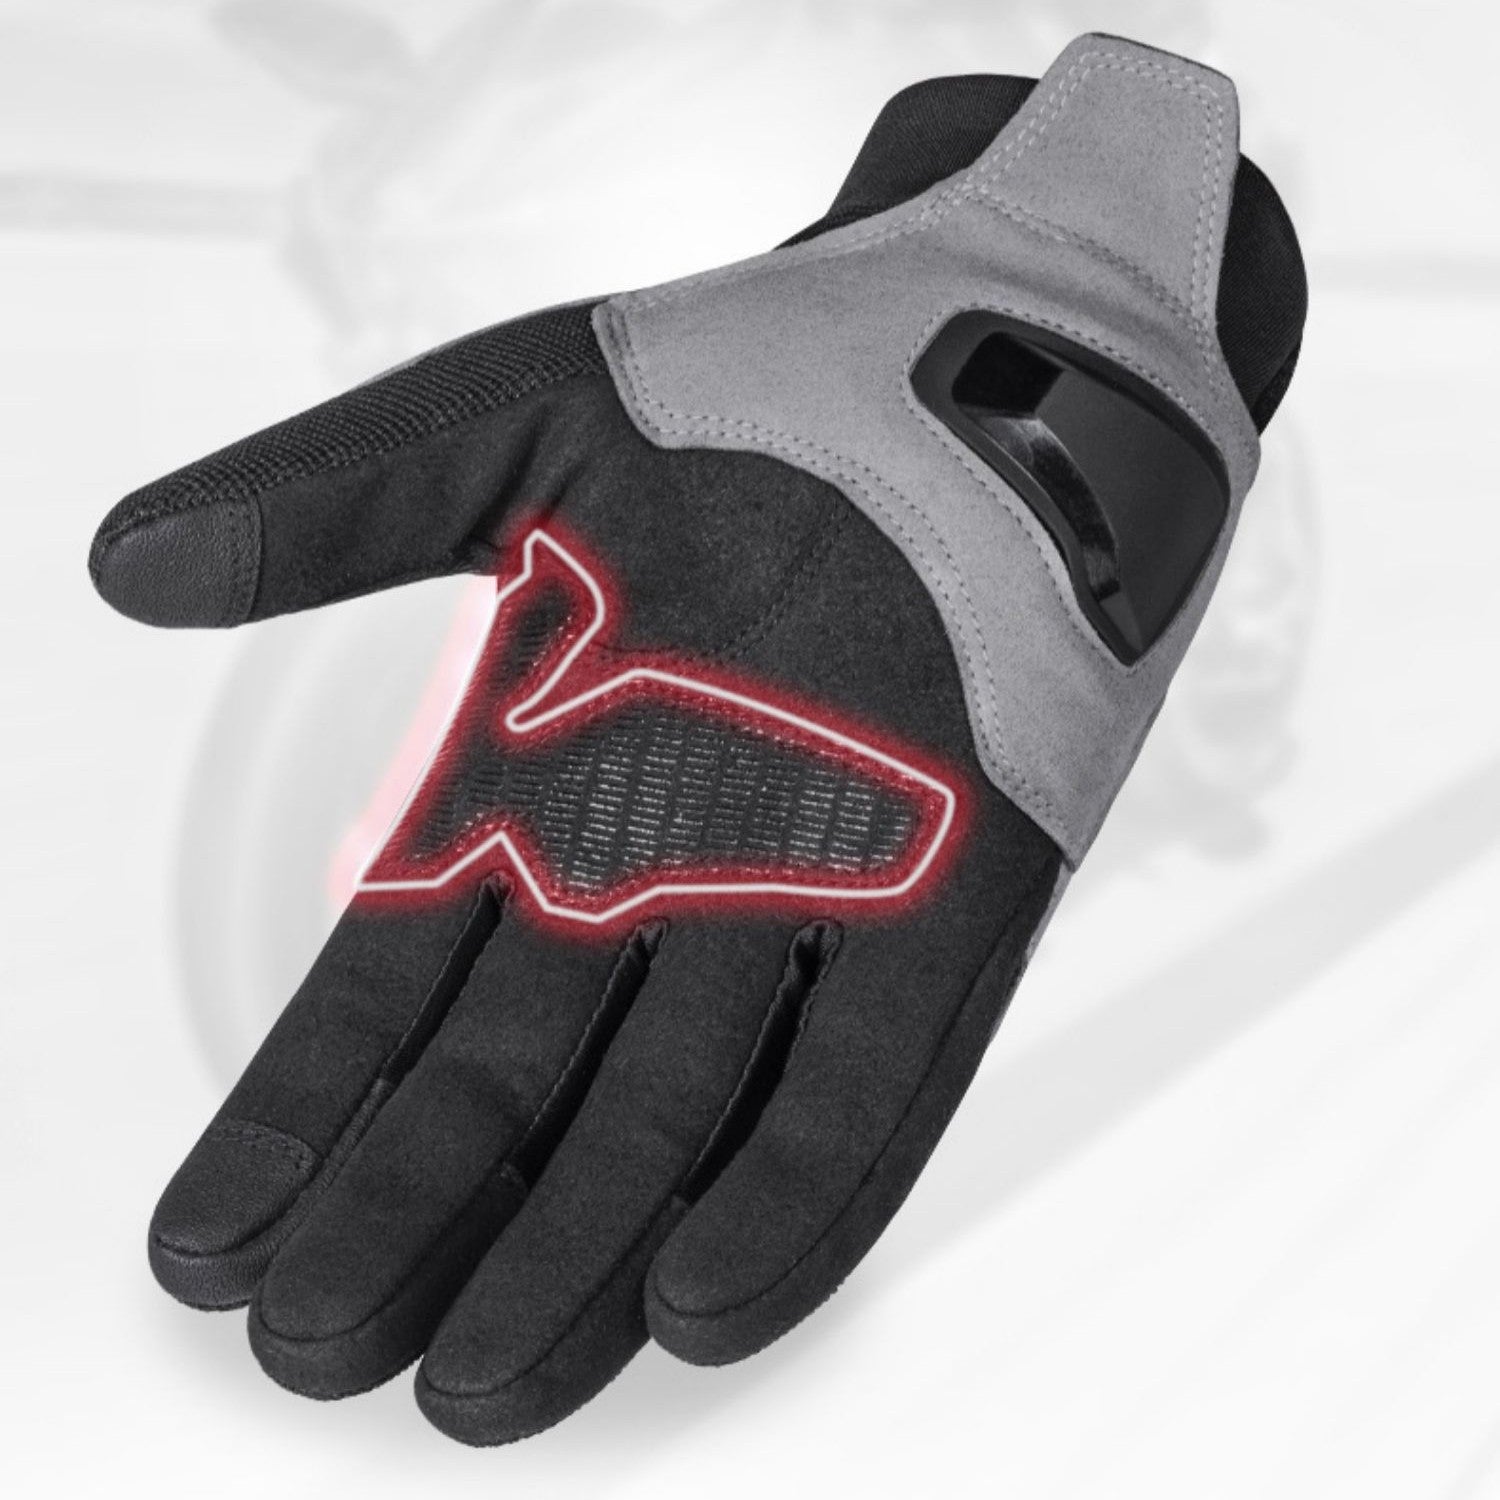 Four Seasons Motorcycle Riding Gloves